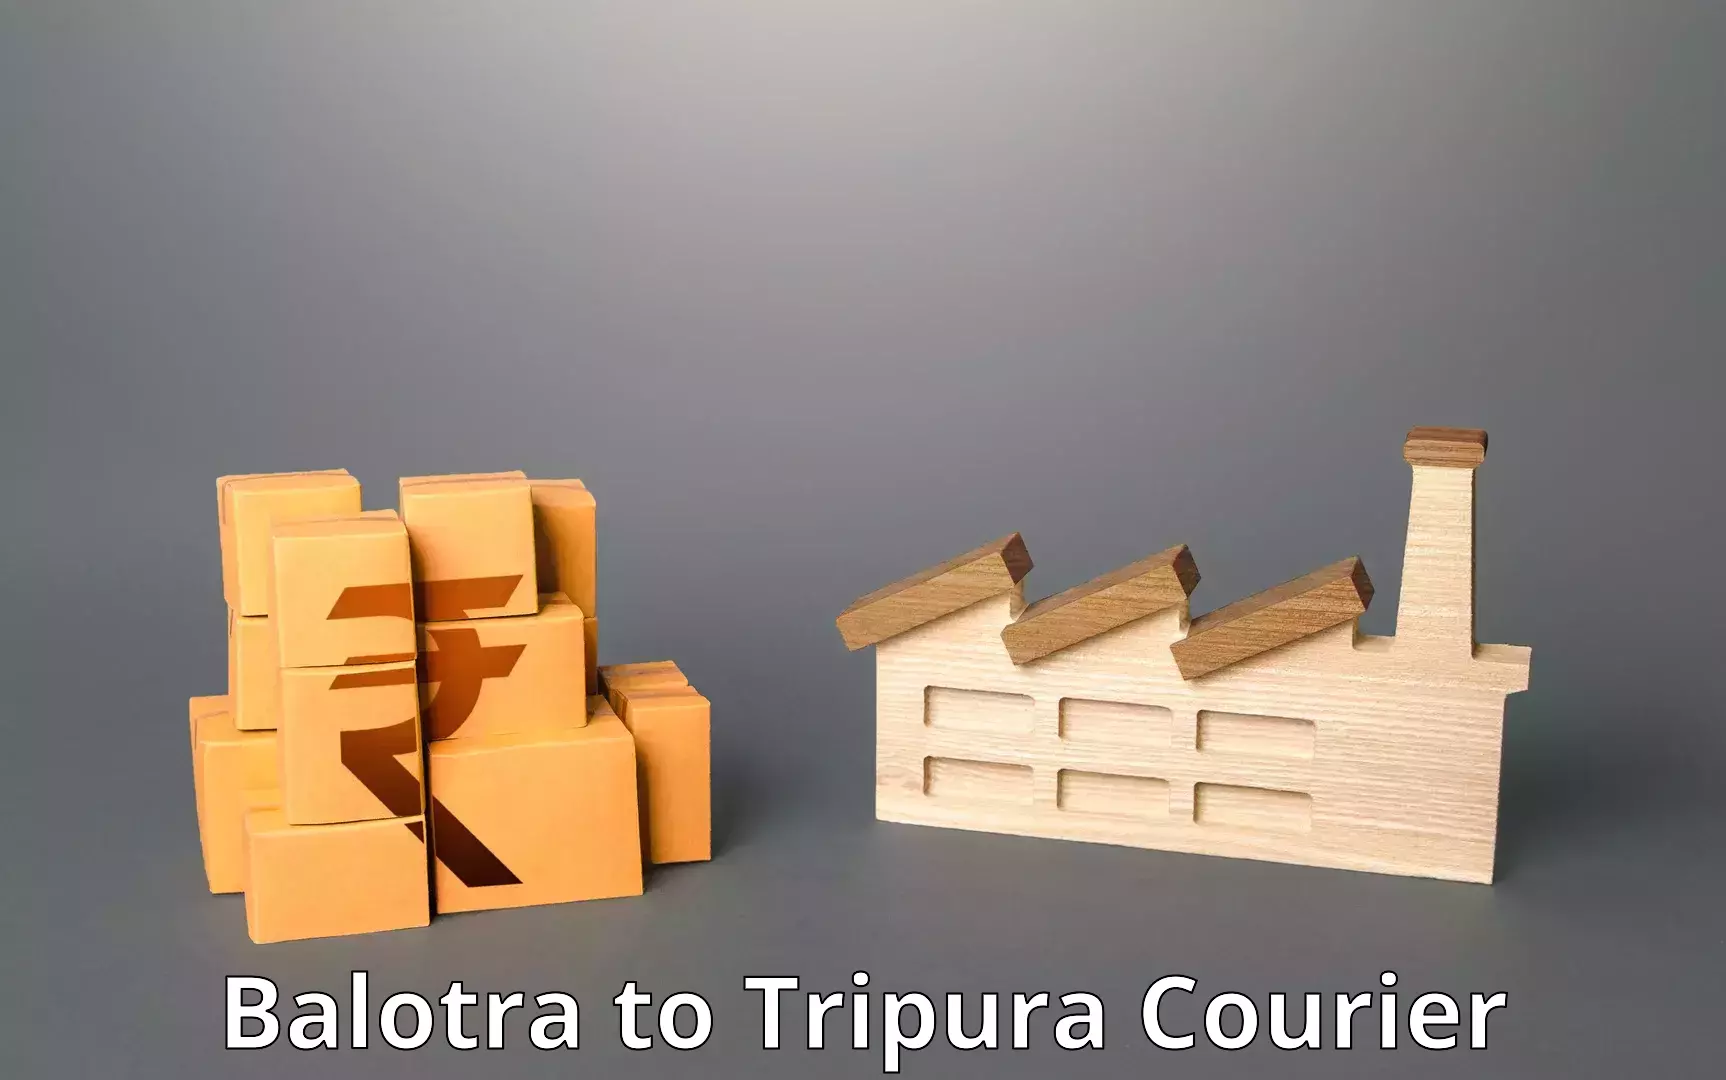 Weekend courier service Balotra to Udaipur Tripura